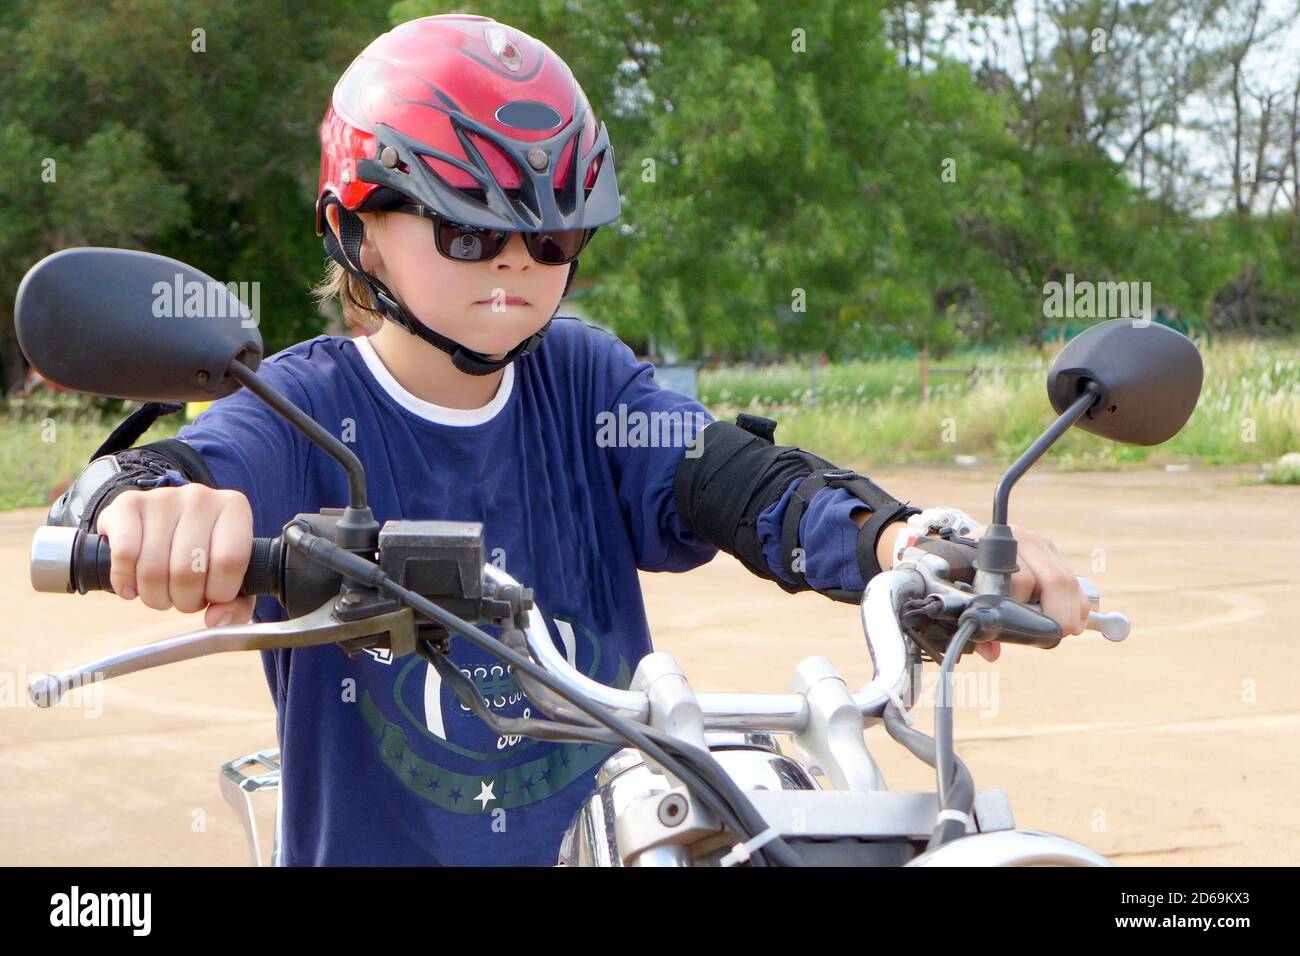 Young boy learning to ride an chopper motorcycle 3. Stock Photo